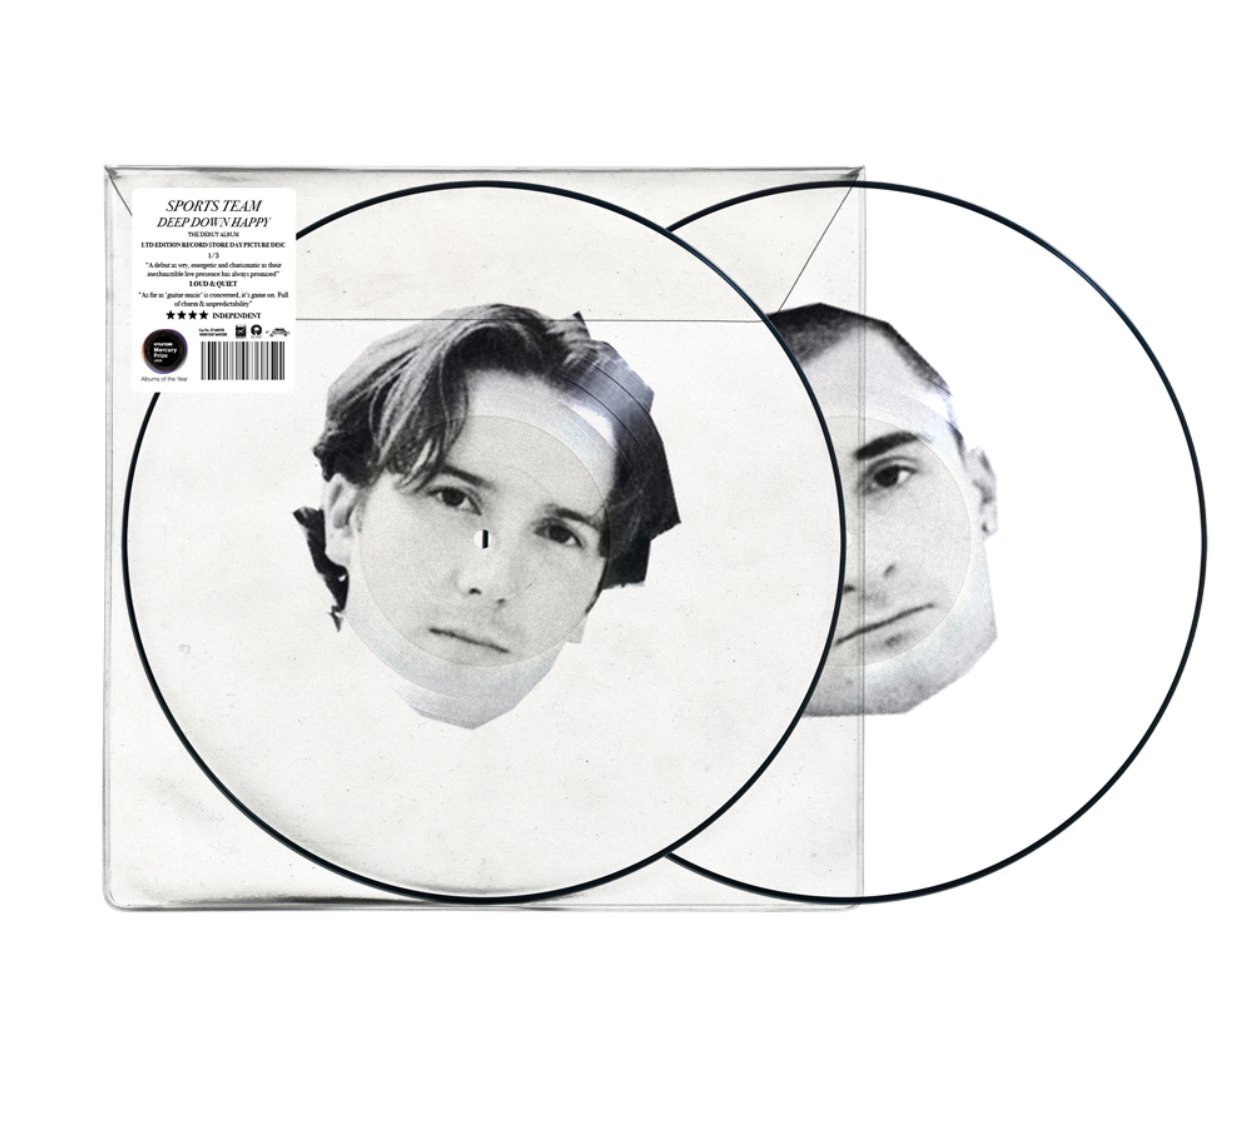 Sports Team ‎– Deep Down Happy LP LTD Picture Disc Cover 3 Record Store Day 2020